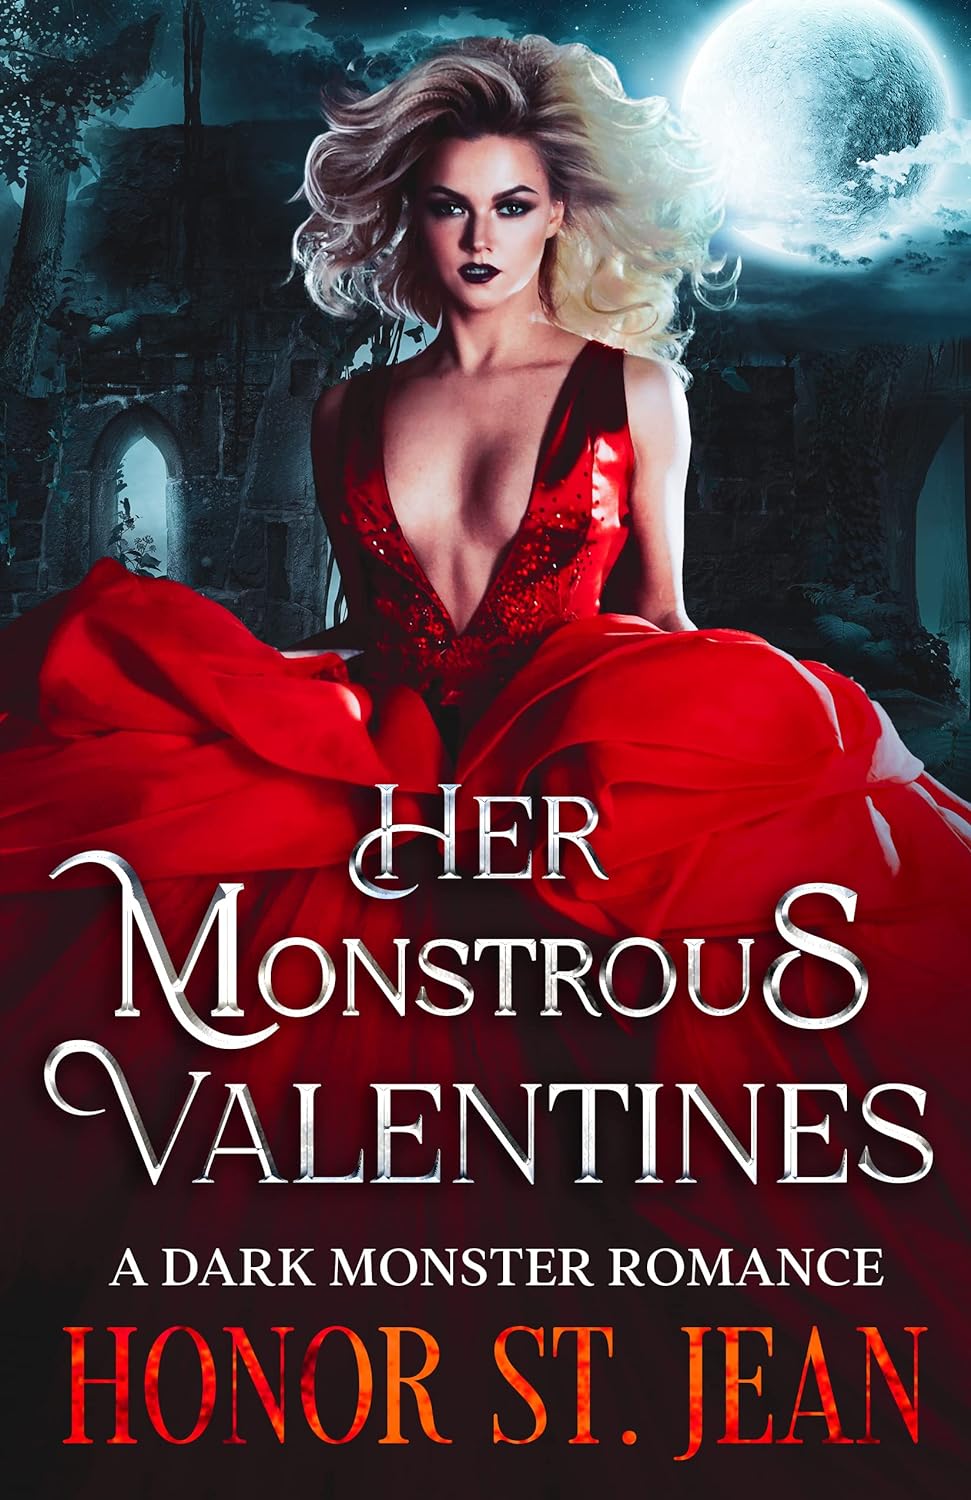 Her Monstrous Valentines by Honor St. Jean